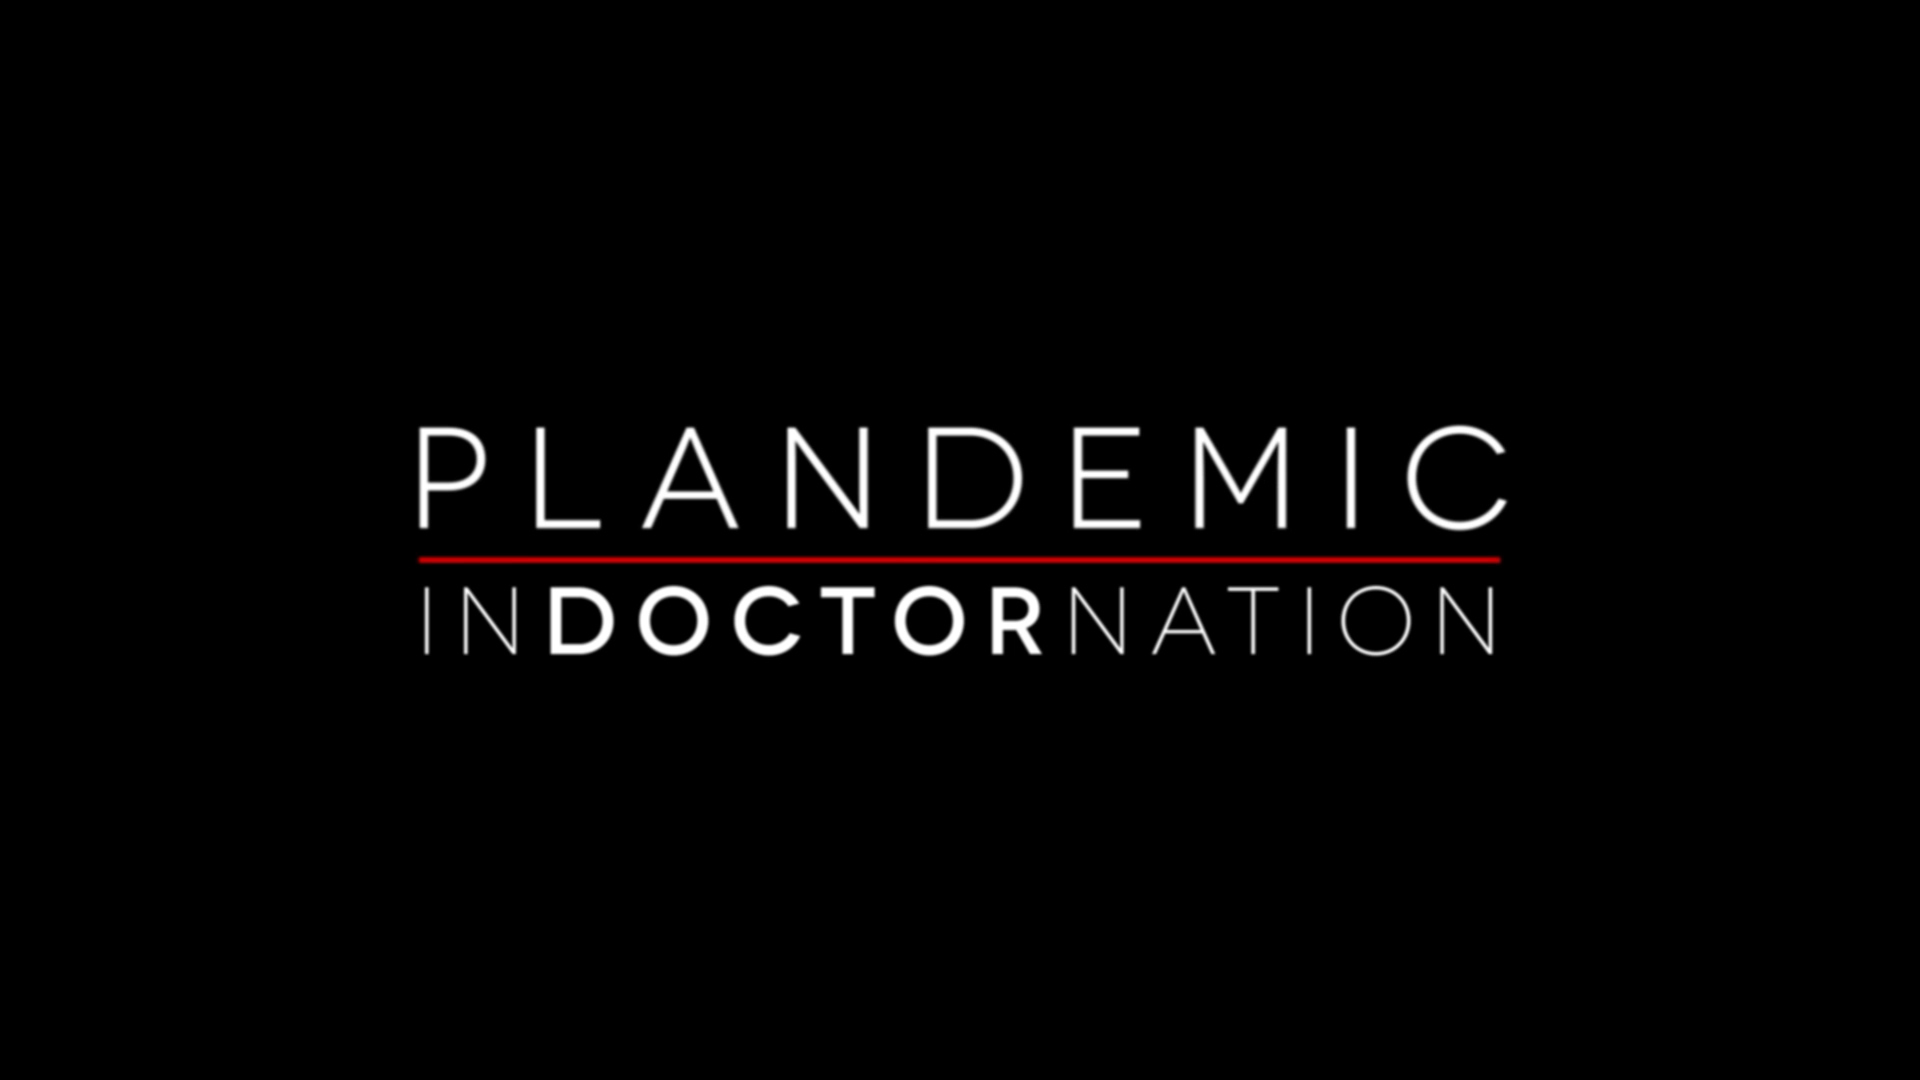 Plandemic II: inDOCTORnation film released – here are the most damning outtakes that expose the criminal fraud of Fauci, the WHO and the CDC